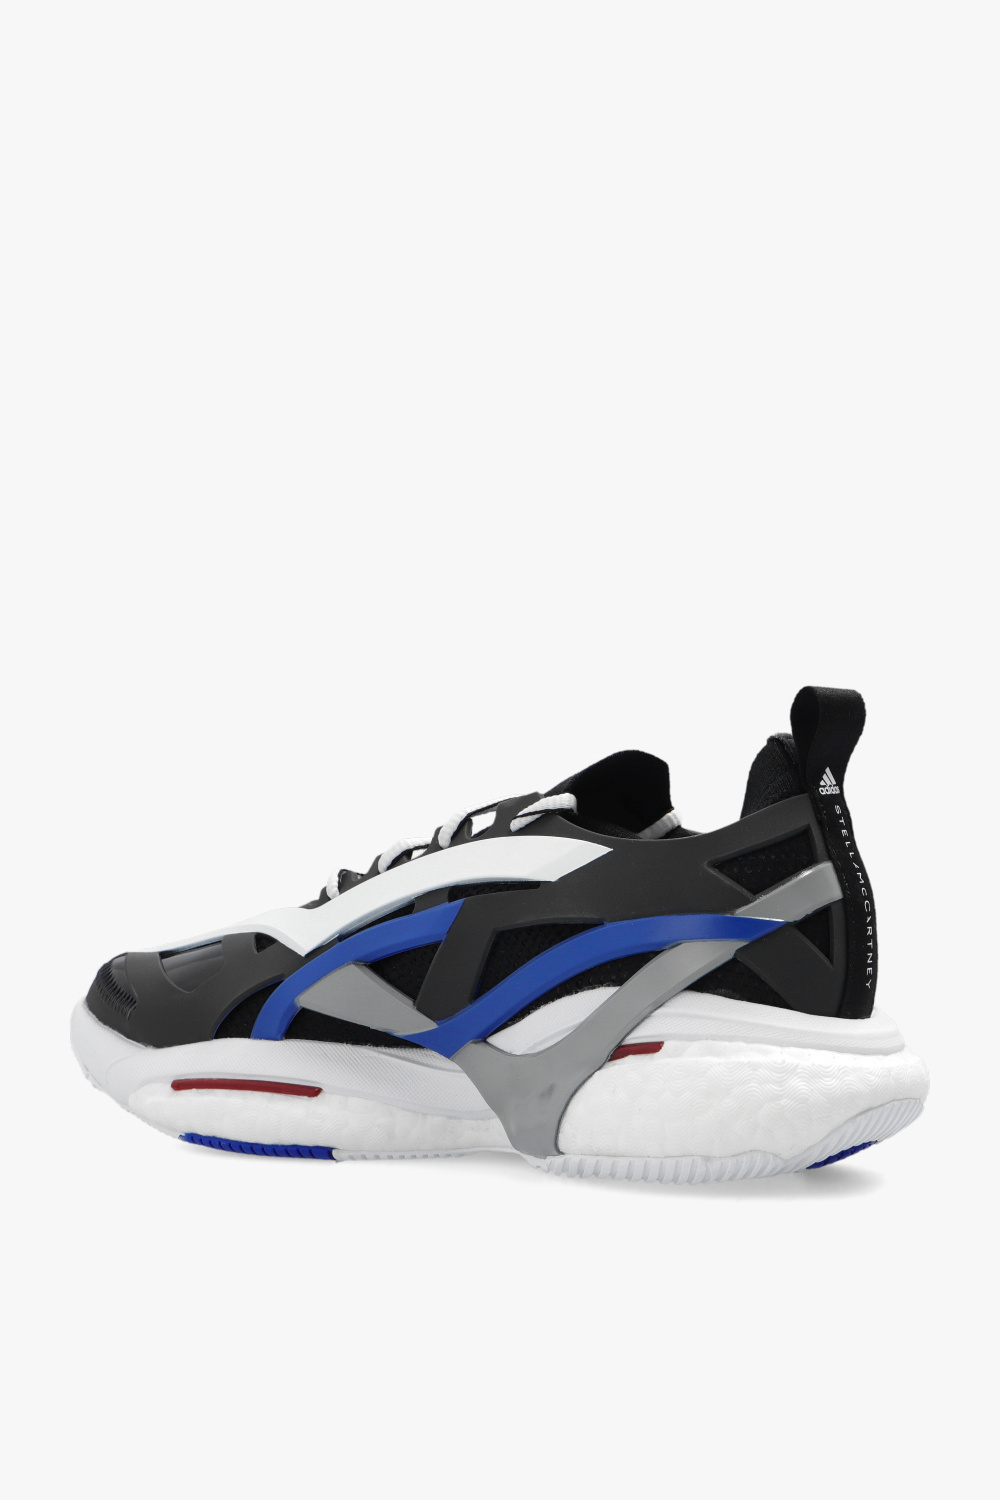 adidas month by Stella McCartney ‘Solarglide’ running shoes